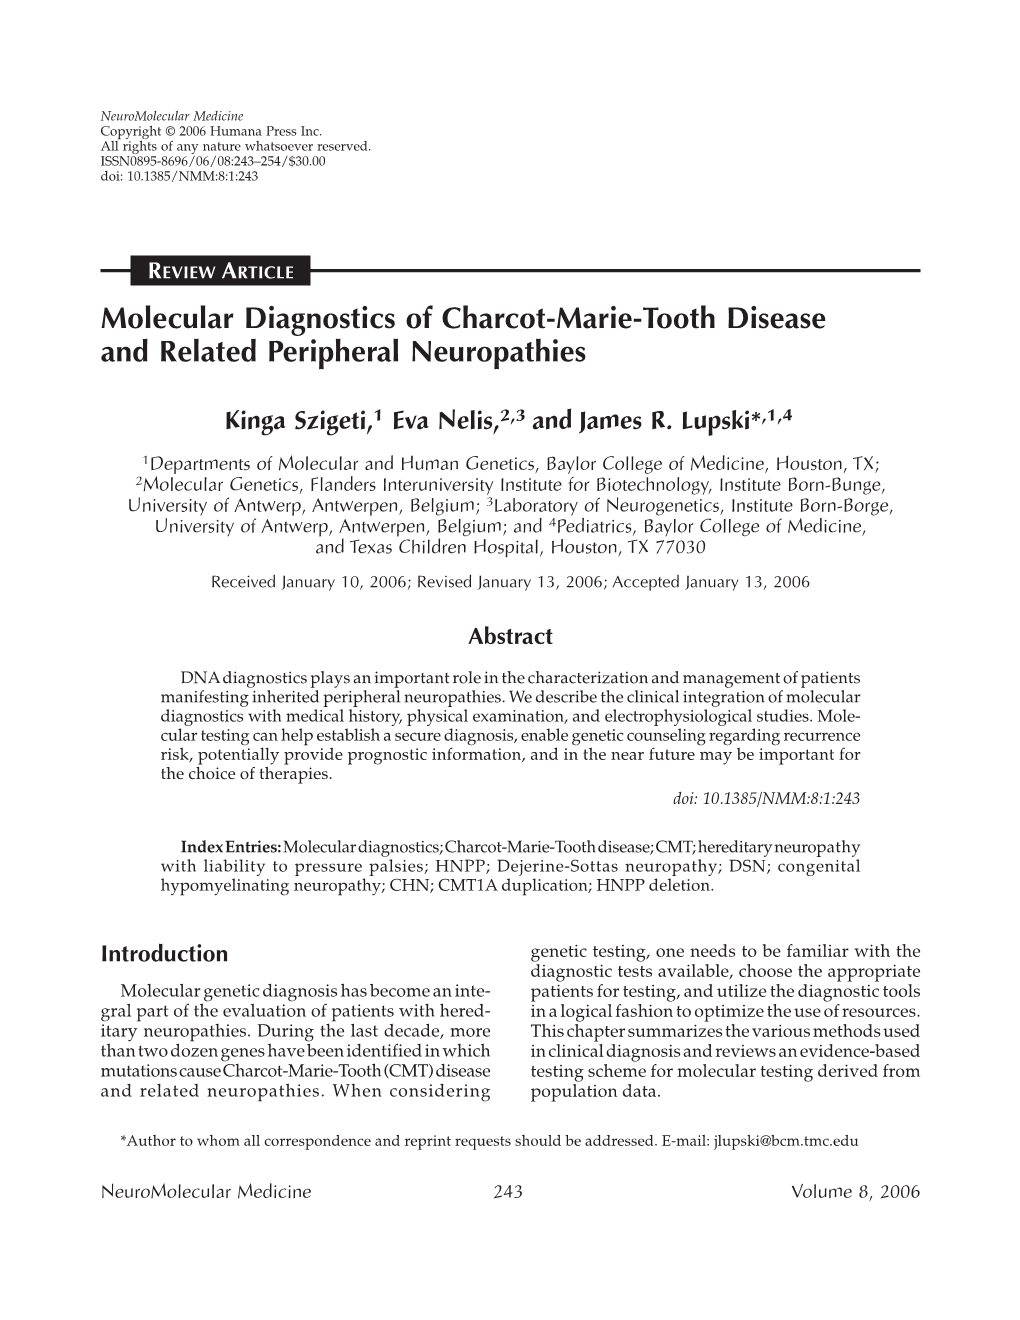 Molecular Diagnostics of Charcot-Marie-Tooth Disease and Related Peripheral Neuropathies